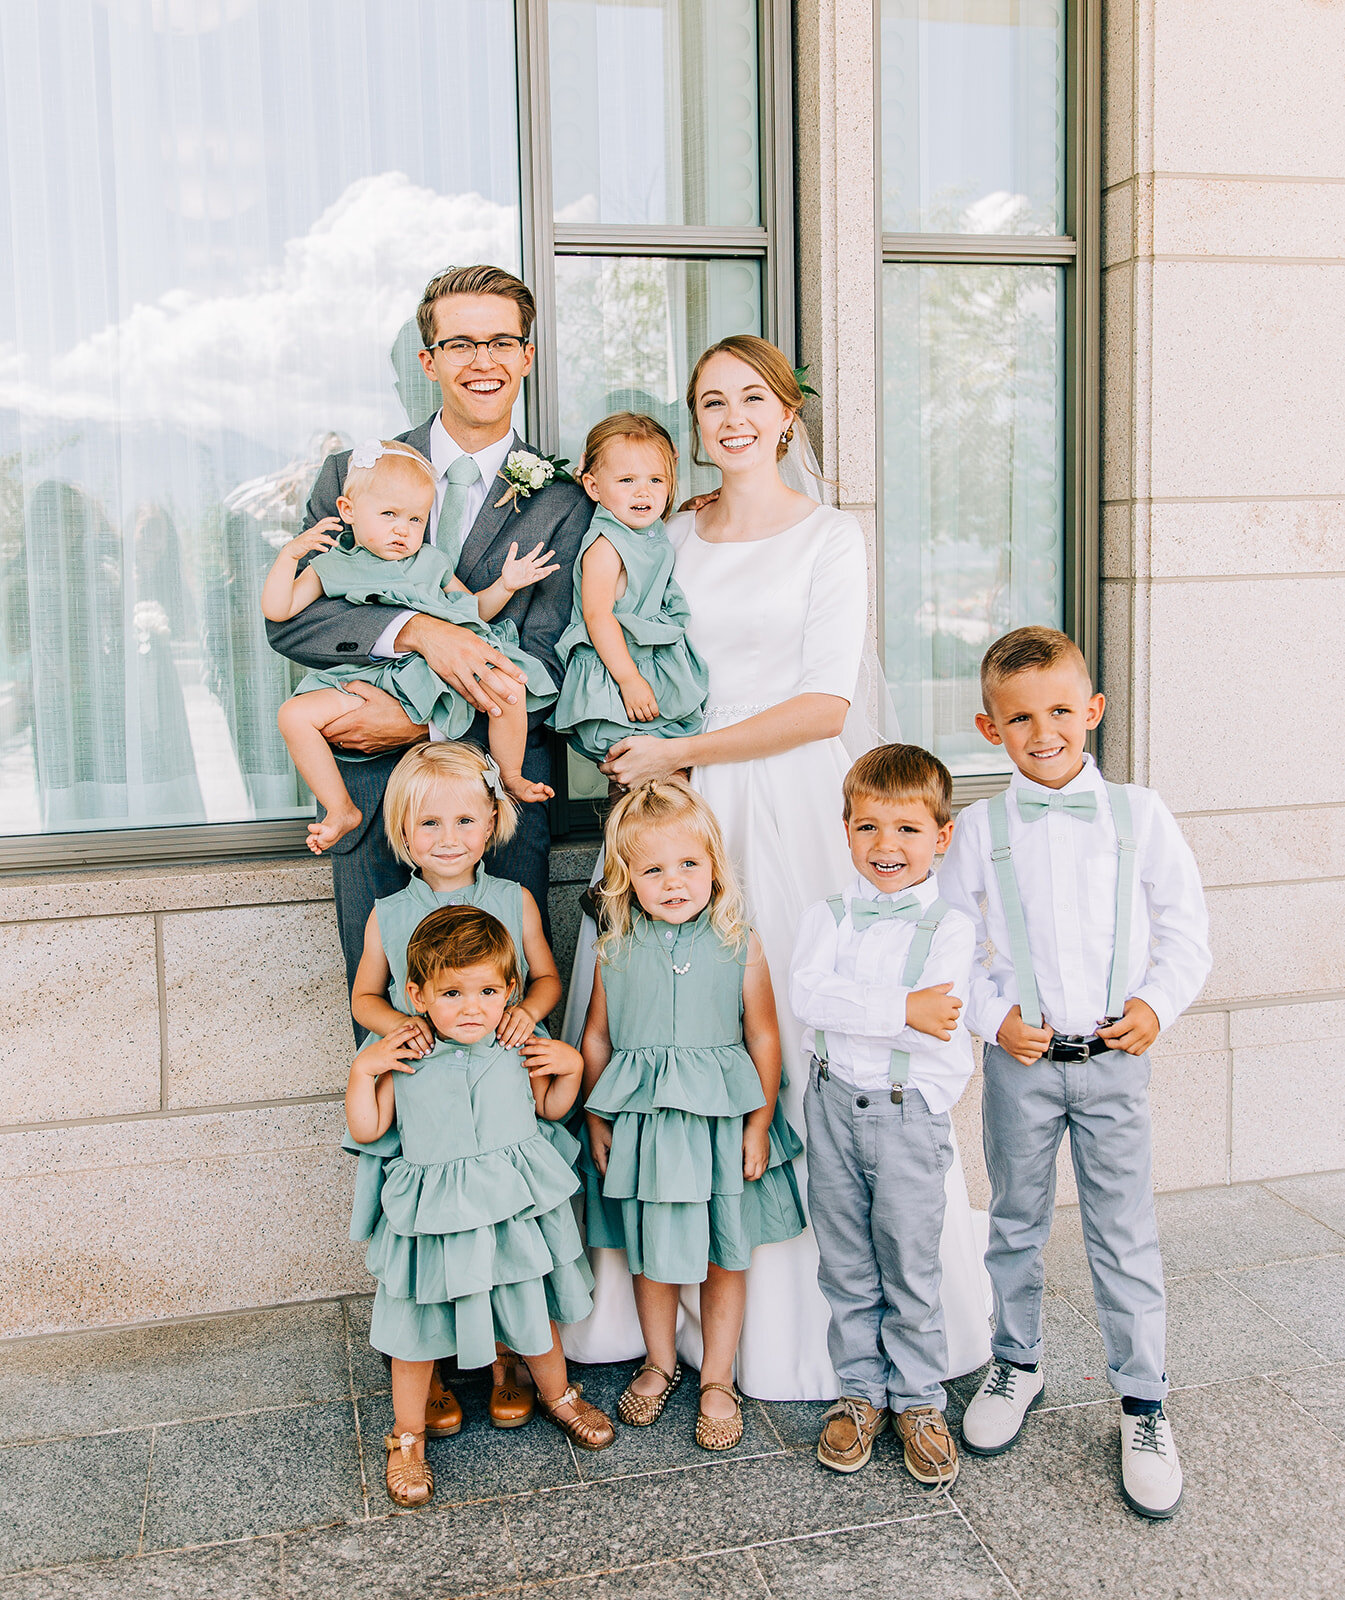  bride and groom posing with nieces and nephews part of the wedding party young kids with the bride and groom ruffle dresses light blue mint wedding color scheme sea green wedding inspo summer wedding ideas bowties and suspenders for little boys affo